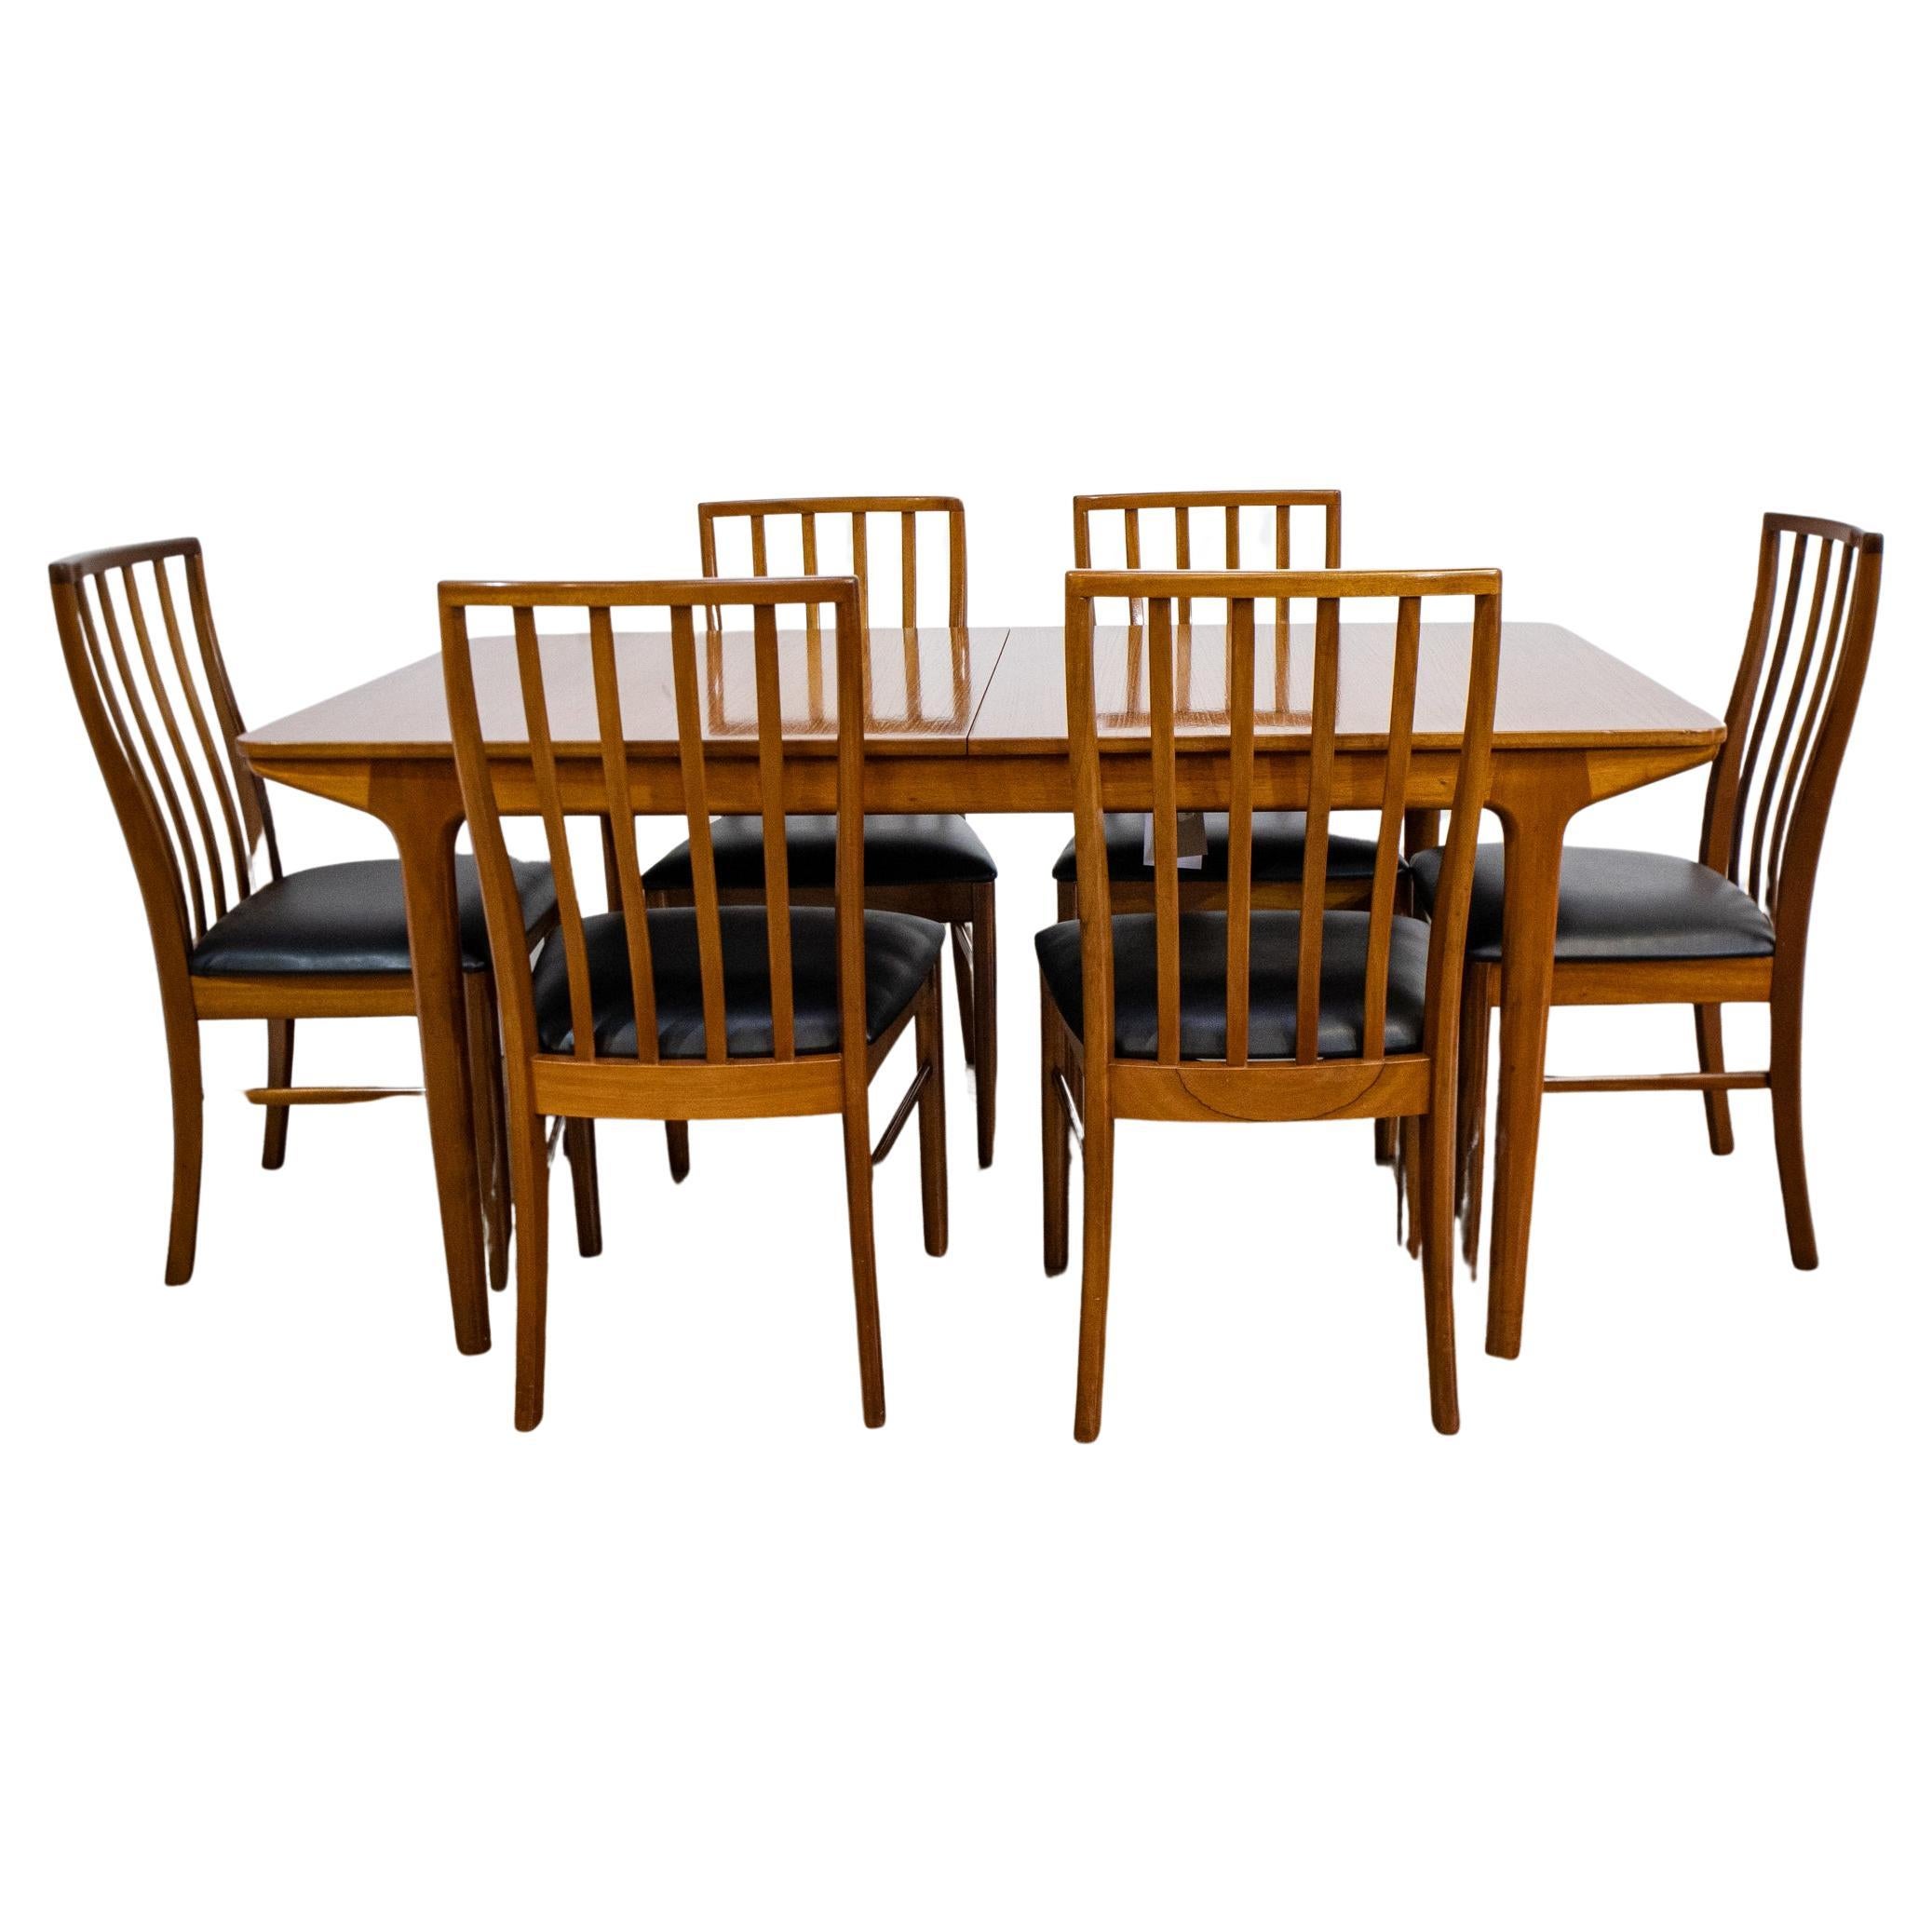 McIntosh Dining Table & Set of 6 Chairs For Sale